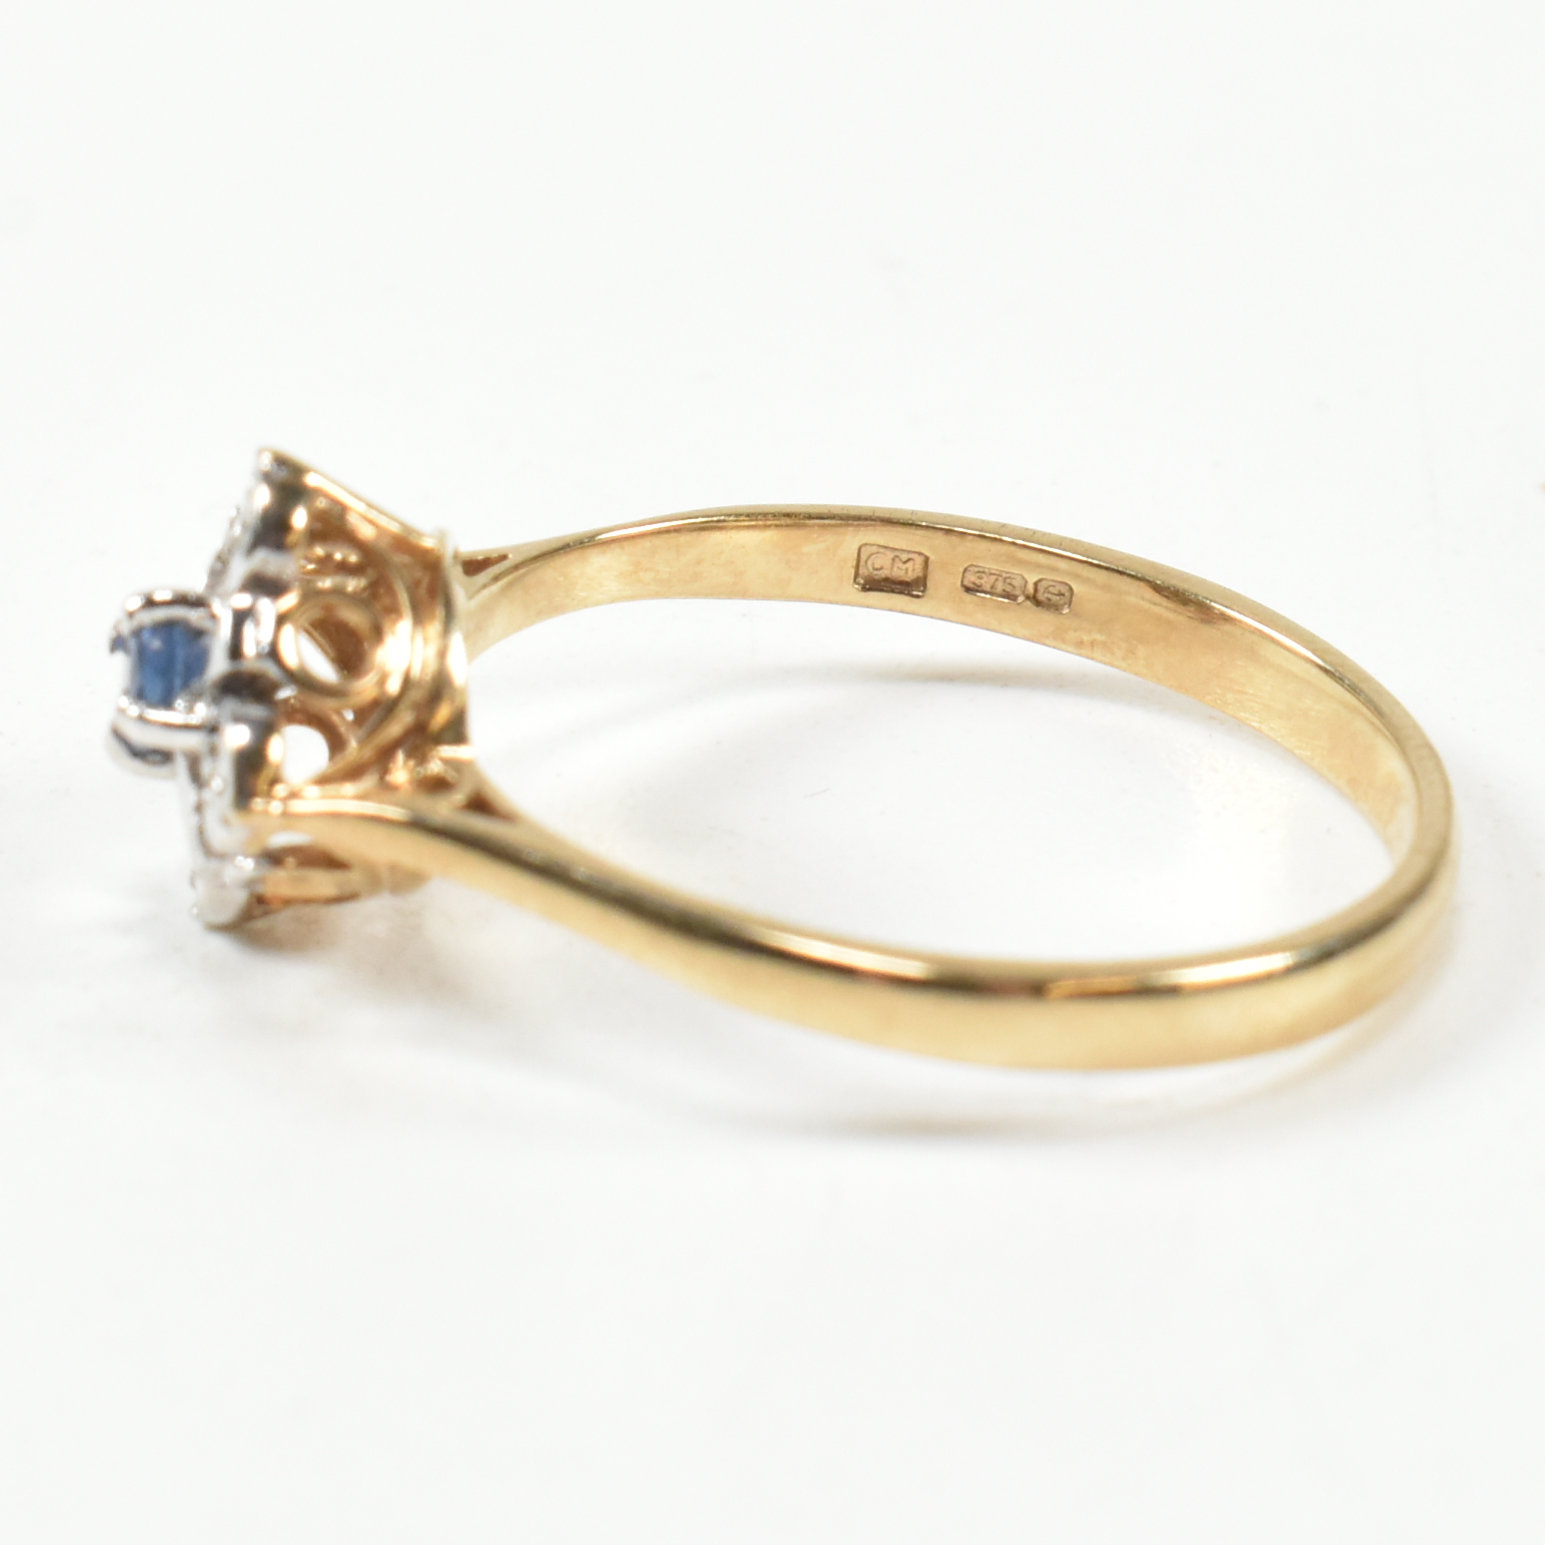 HALLMARKED 9CT GOLD SAPPHIRE & DIAMOND CLUSTER RING - Image 8 of 9